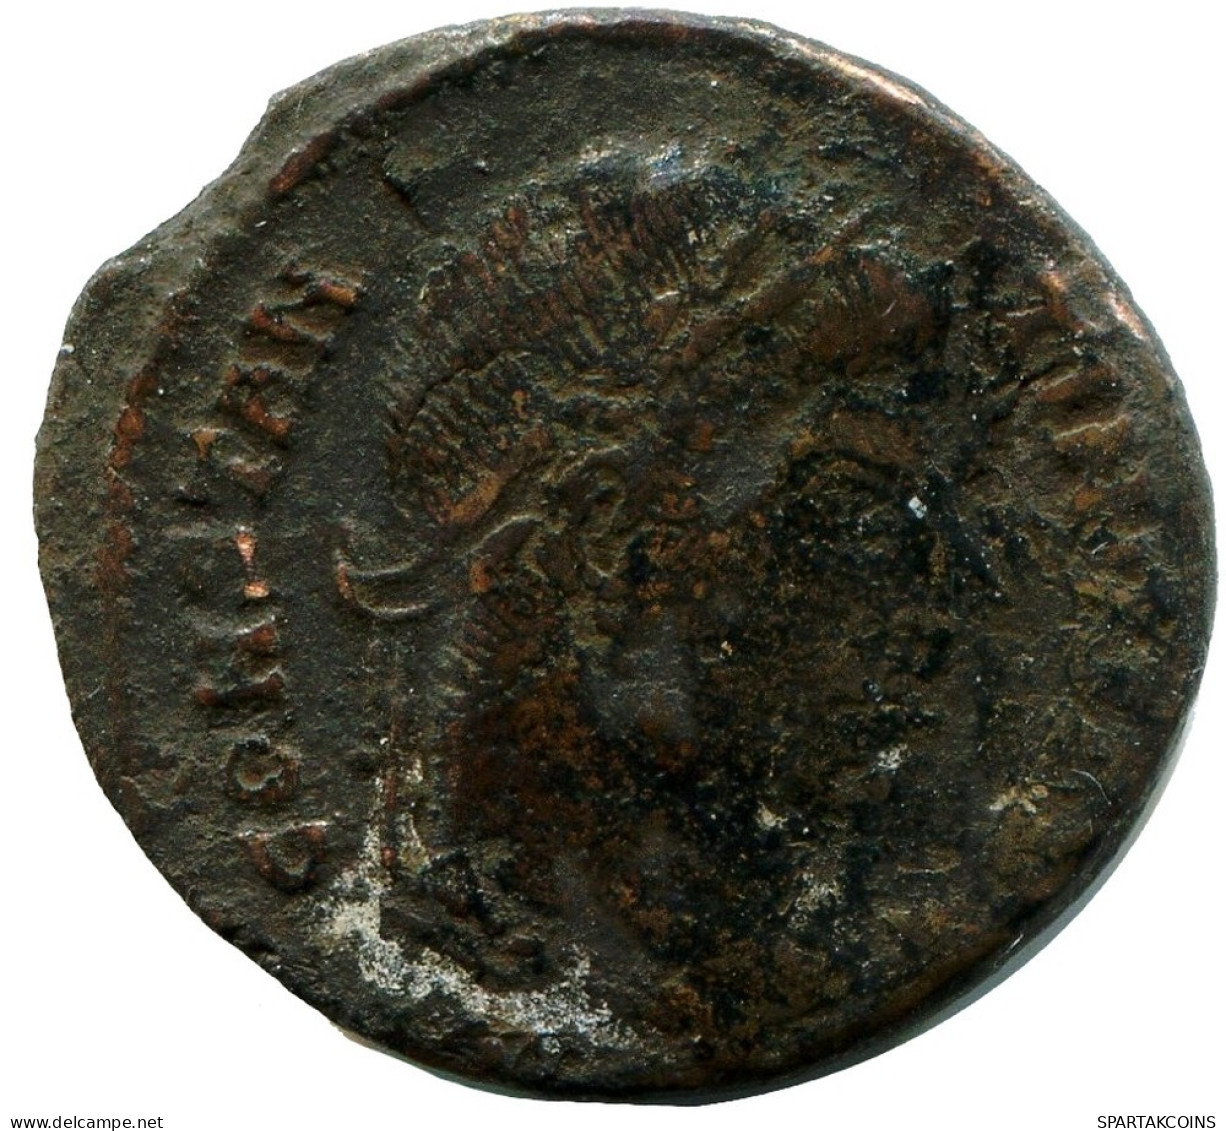 CONSTANTINE I MINTED IN ROME ITALY FOUND IN IHNASYAH HOARD EGYPT #ANC11156.14.E.A - The Christian Empire (307 AD Tot 363 AD)